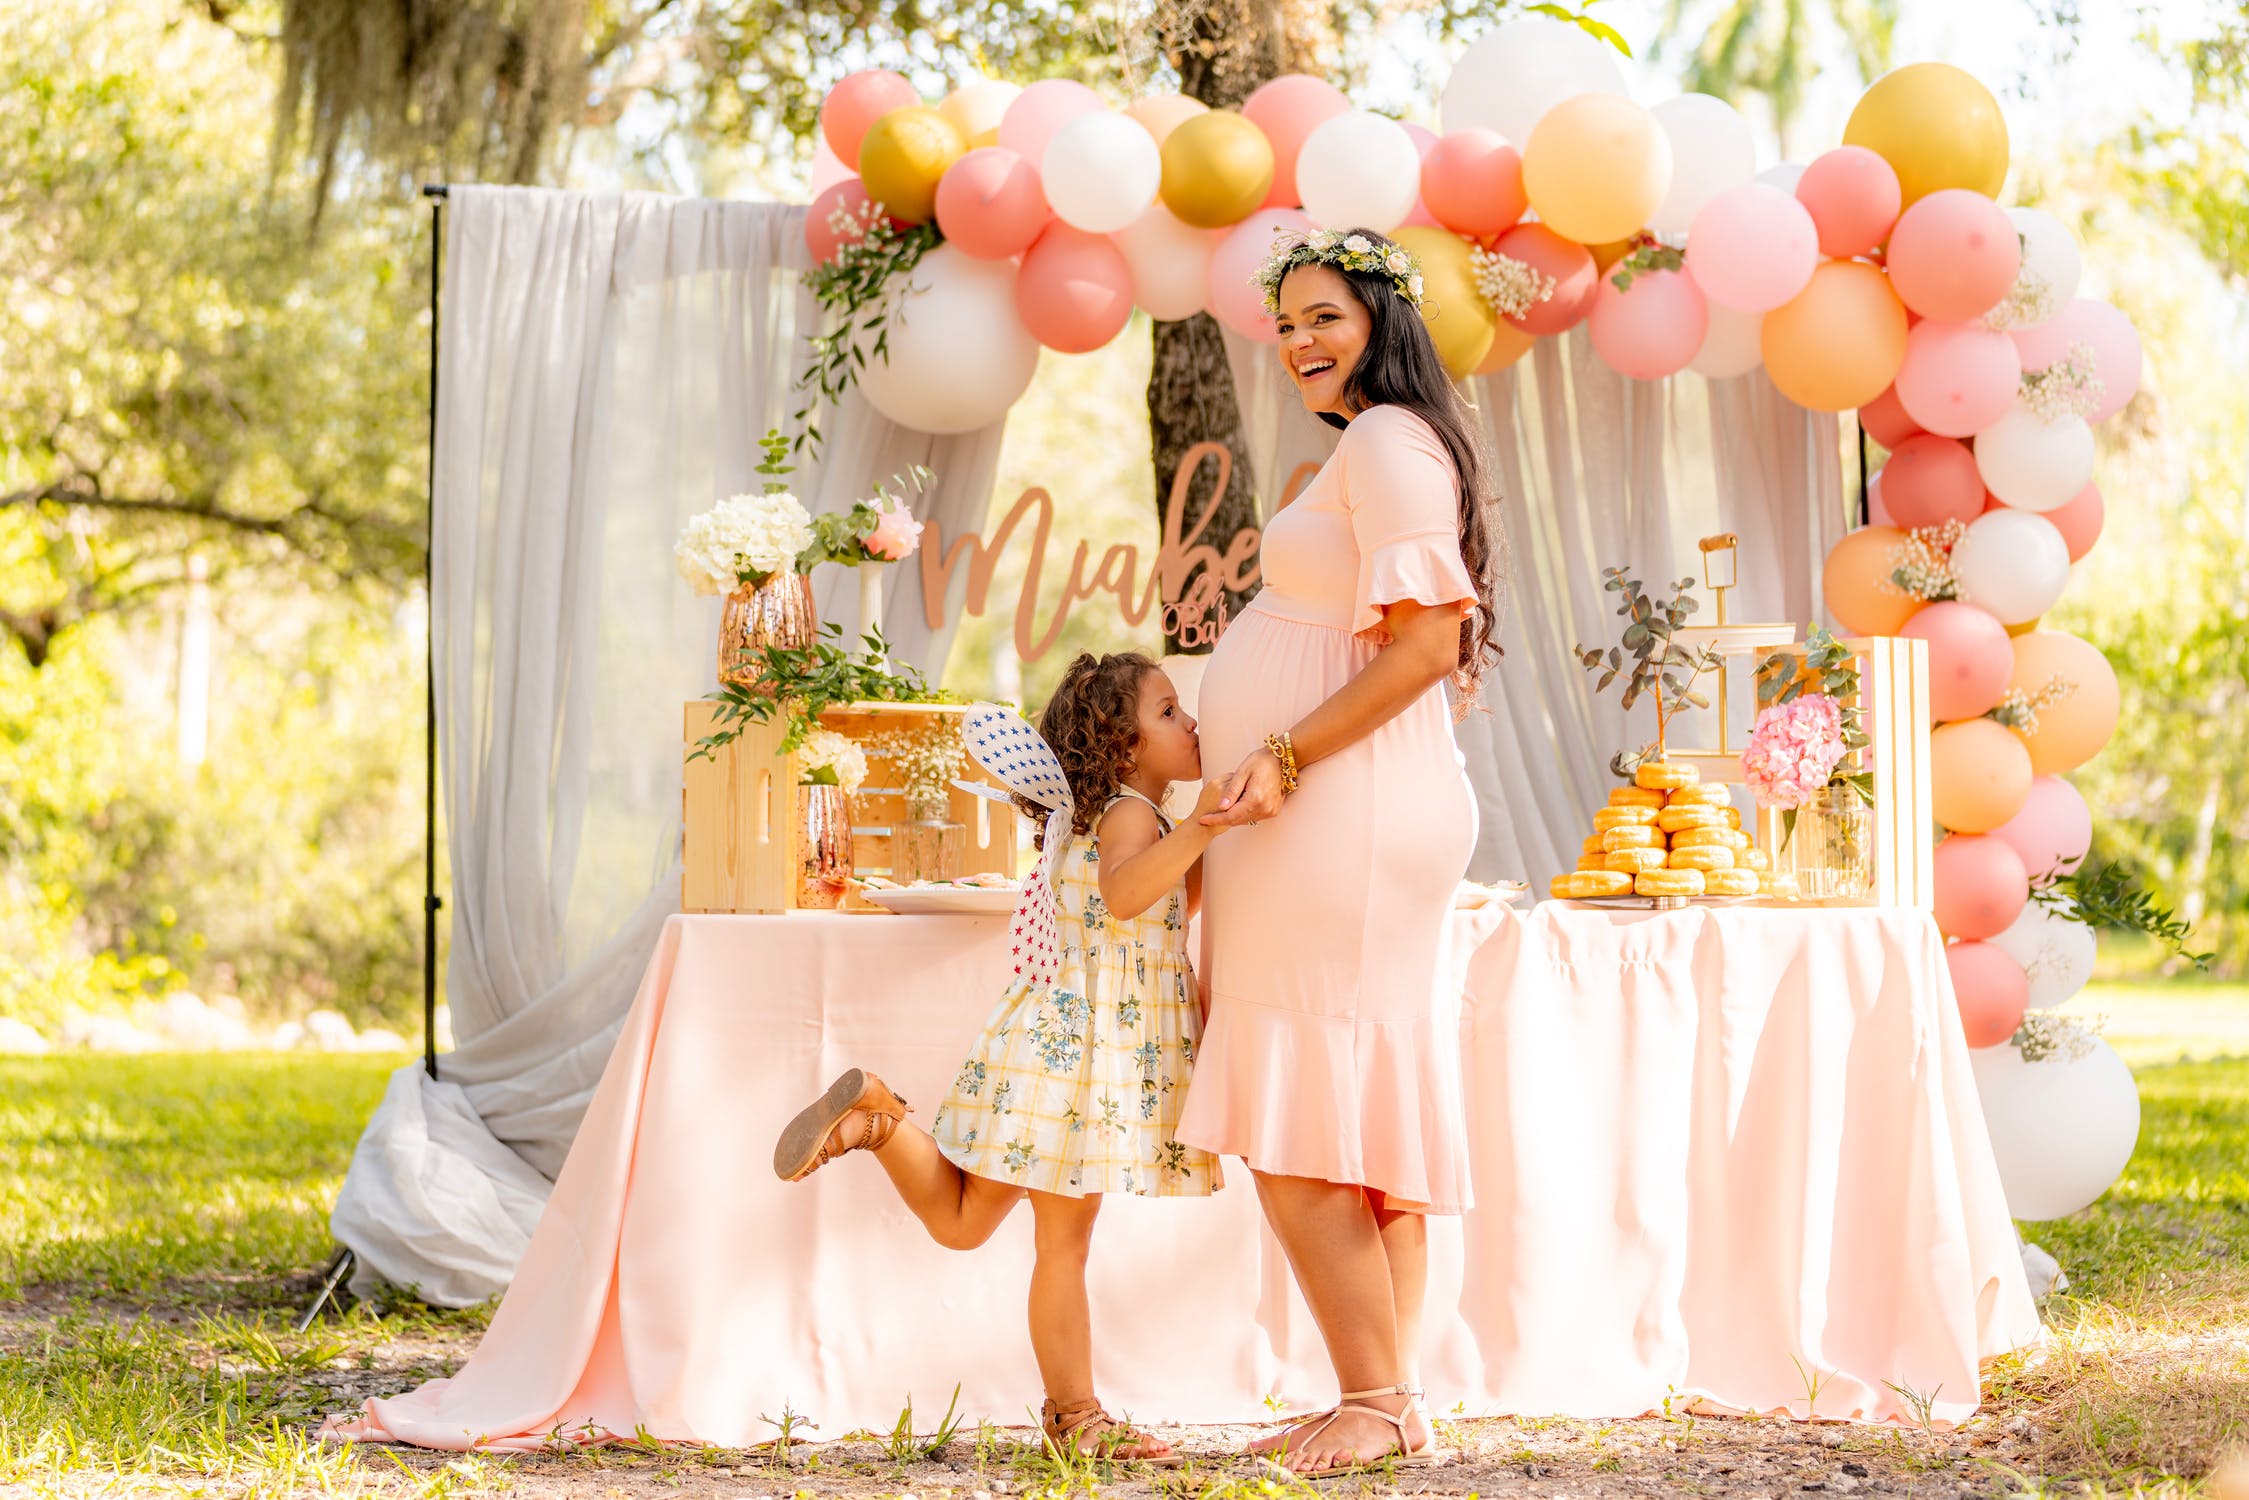 The Expecting Parent’s Guide to Throwing a Baby Shower